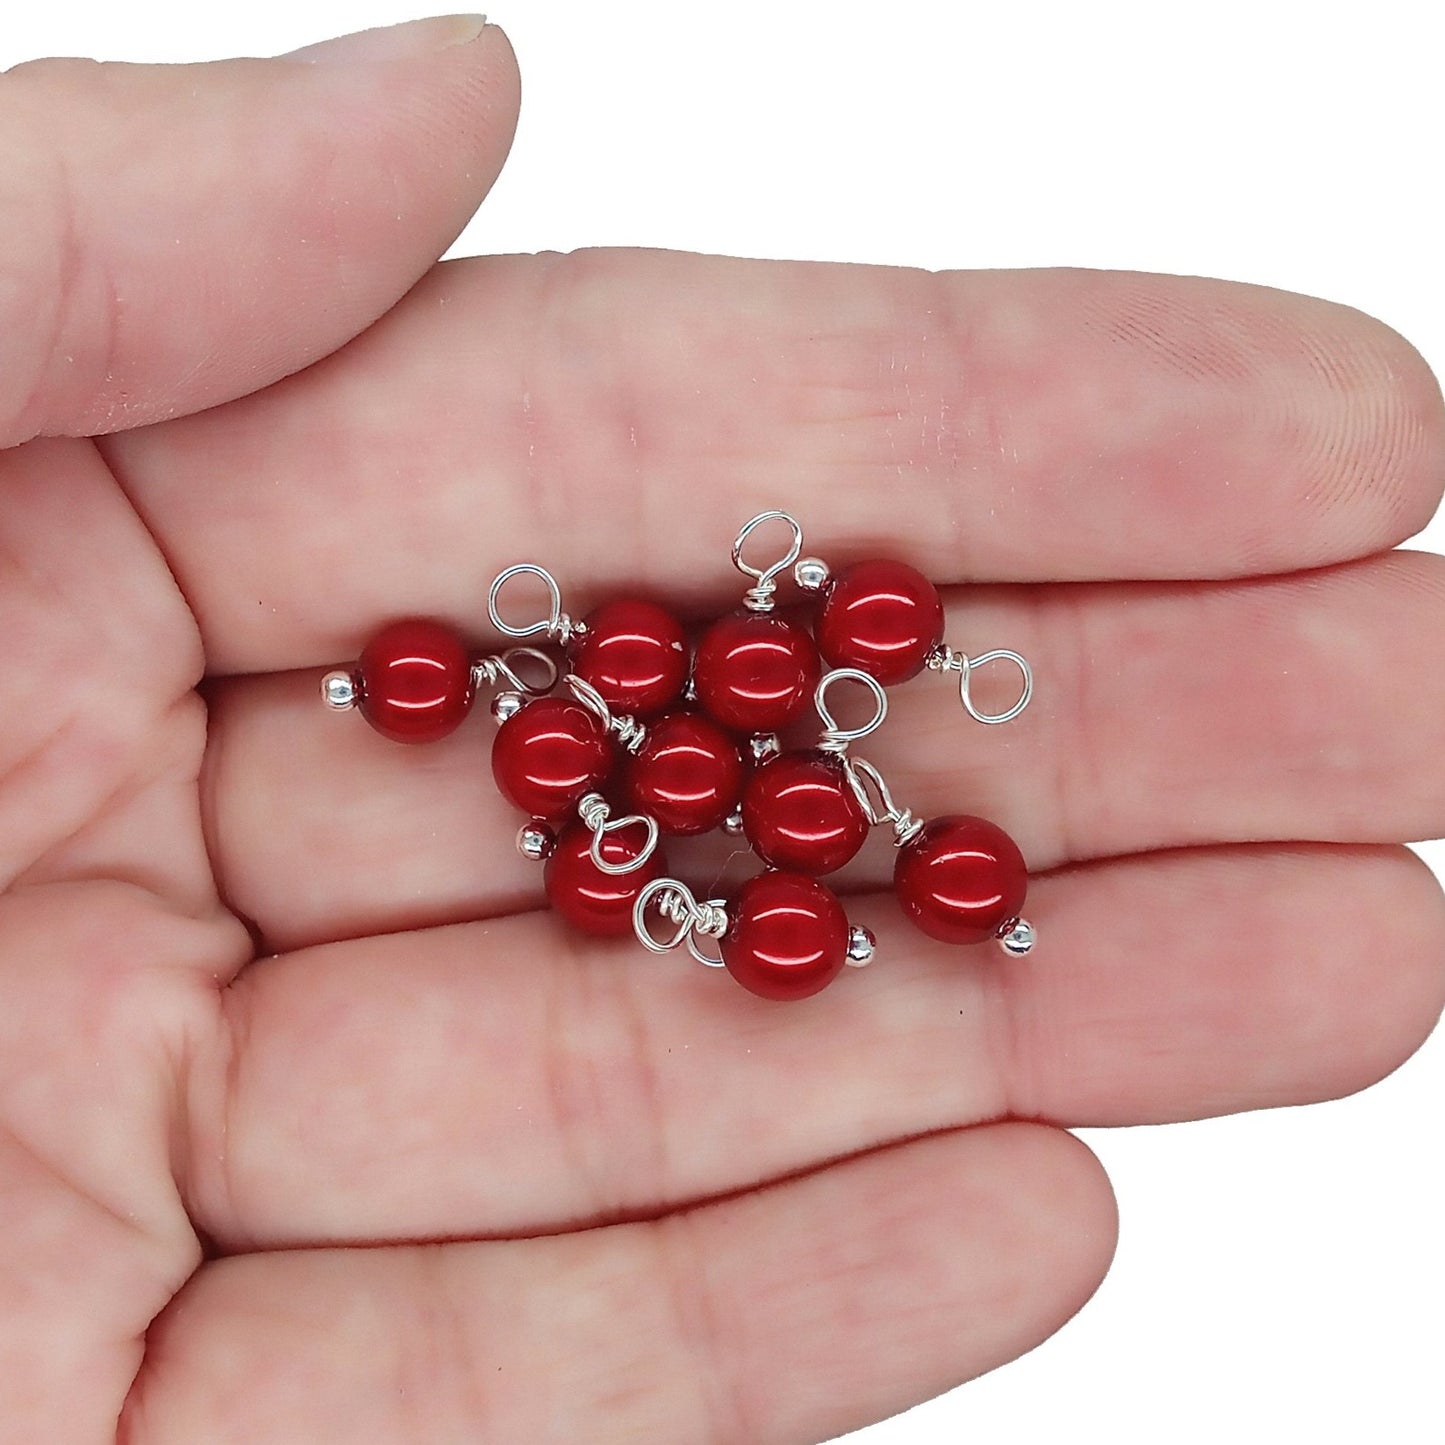 Crystal Pearl Bead Charms, Small Red 6mm Dangles - Adorabilities Charms & Trinkets